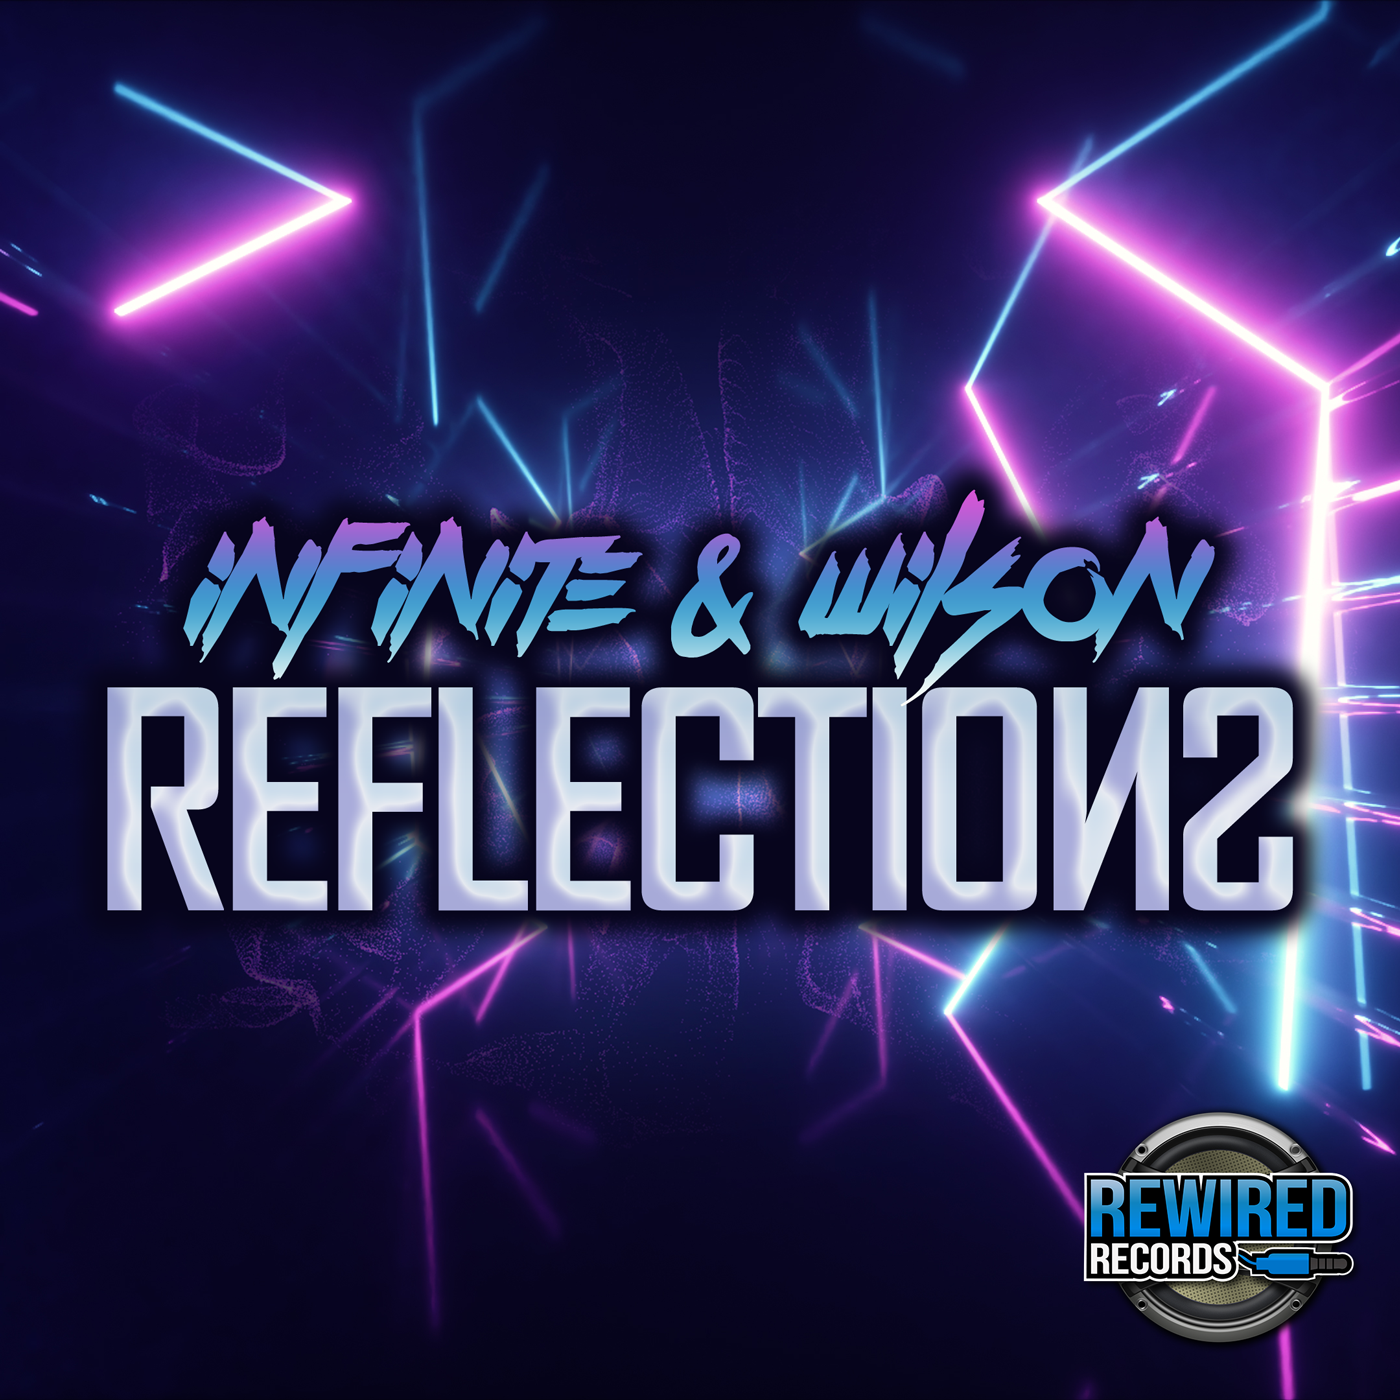 Infinite & Wilson - Reflections - Rewired Records